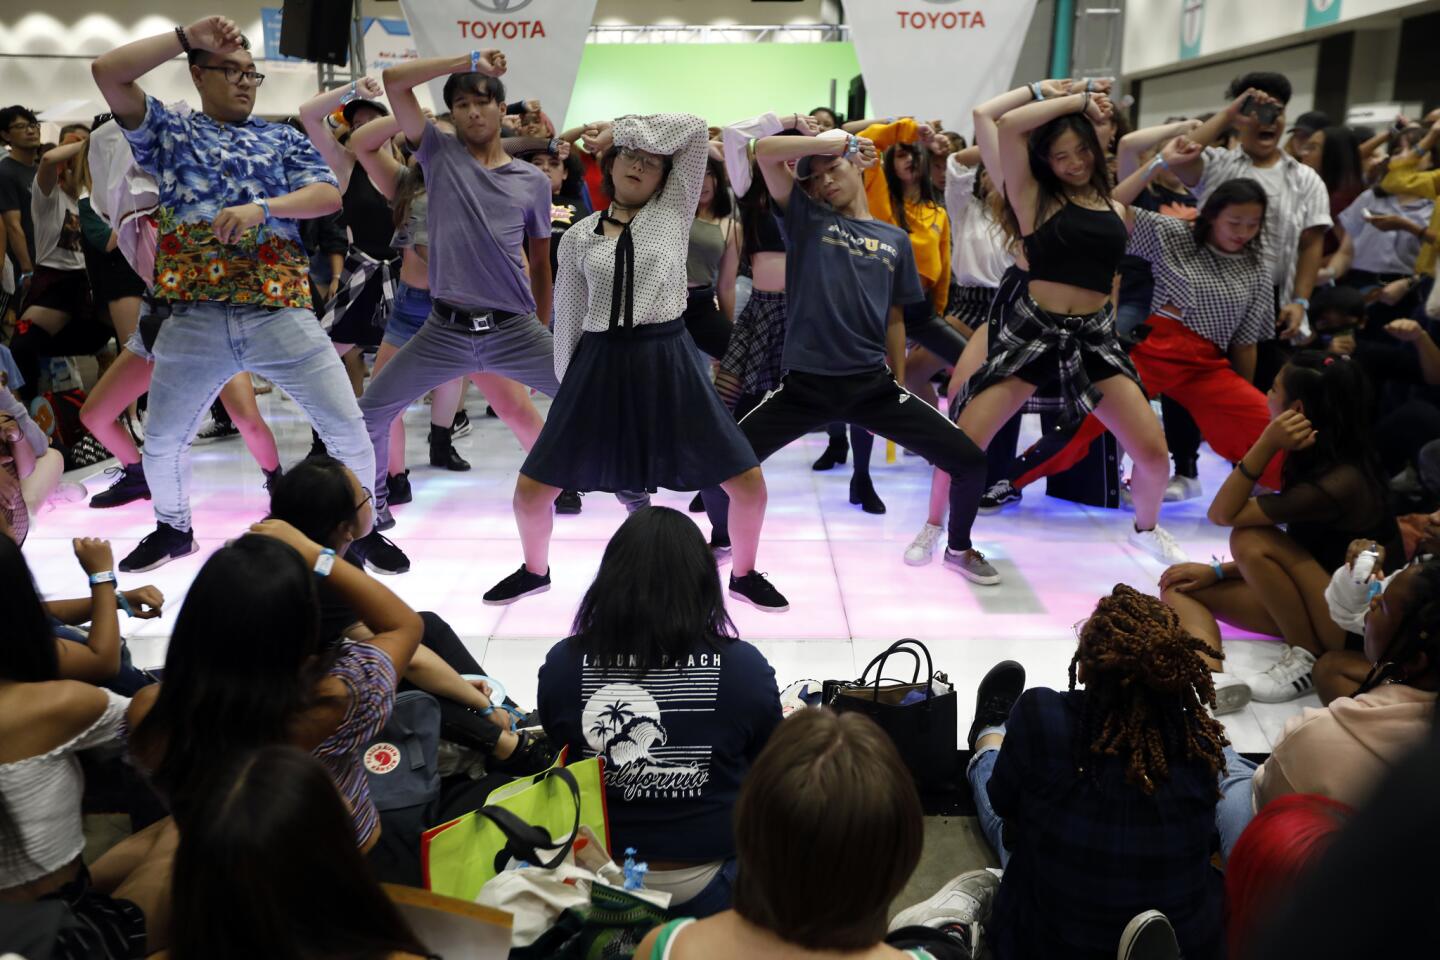 People break into dance at the Toyota Booth during KCON LA.